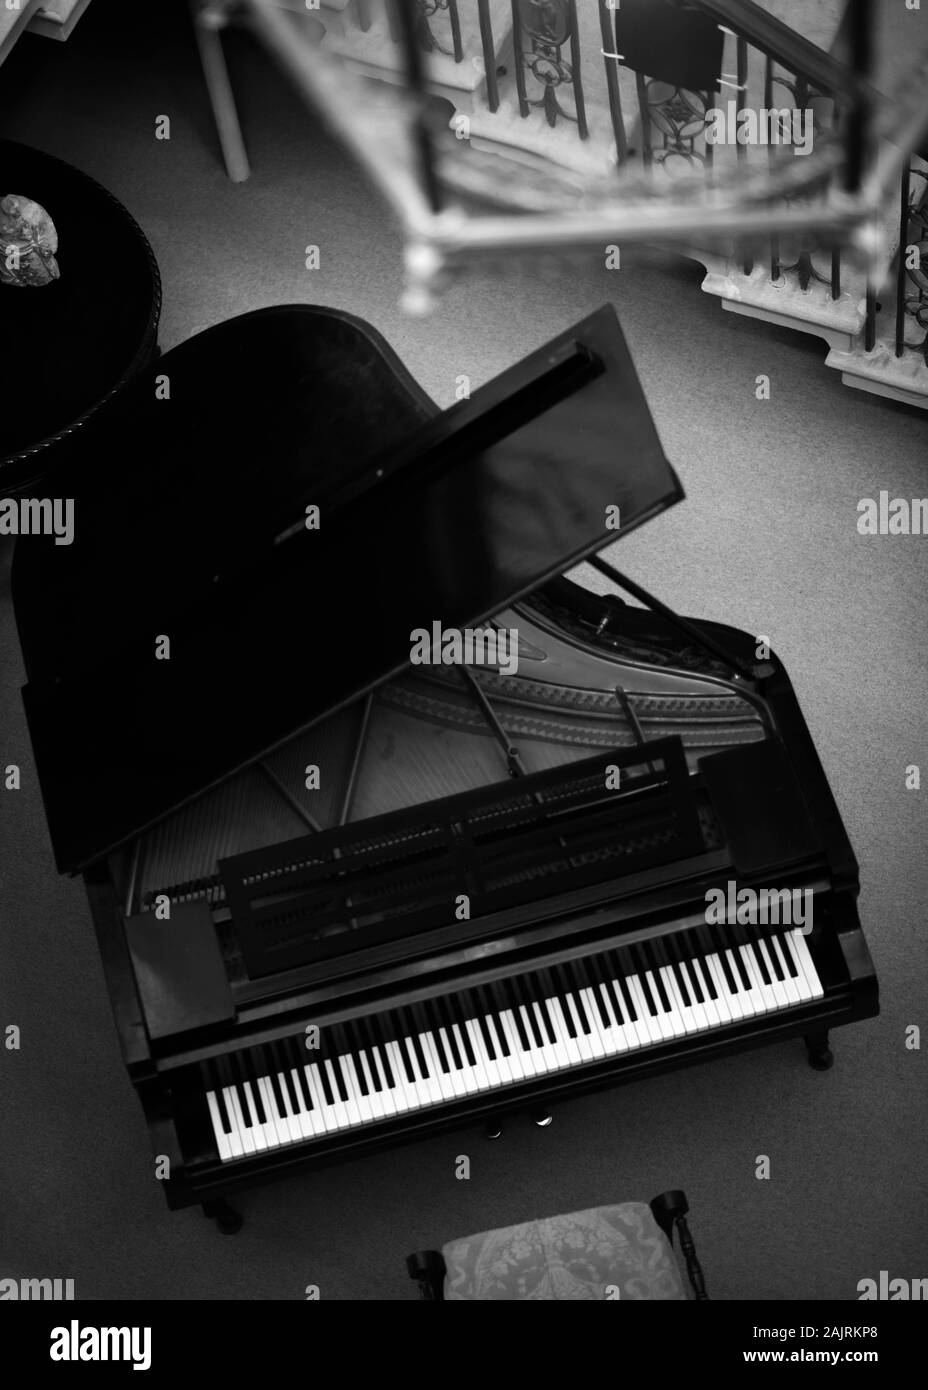 Black and White Image of Grand Piano taken from birds eye perspective at top of stairs. Stock Photo